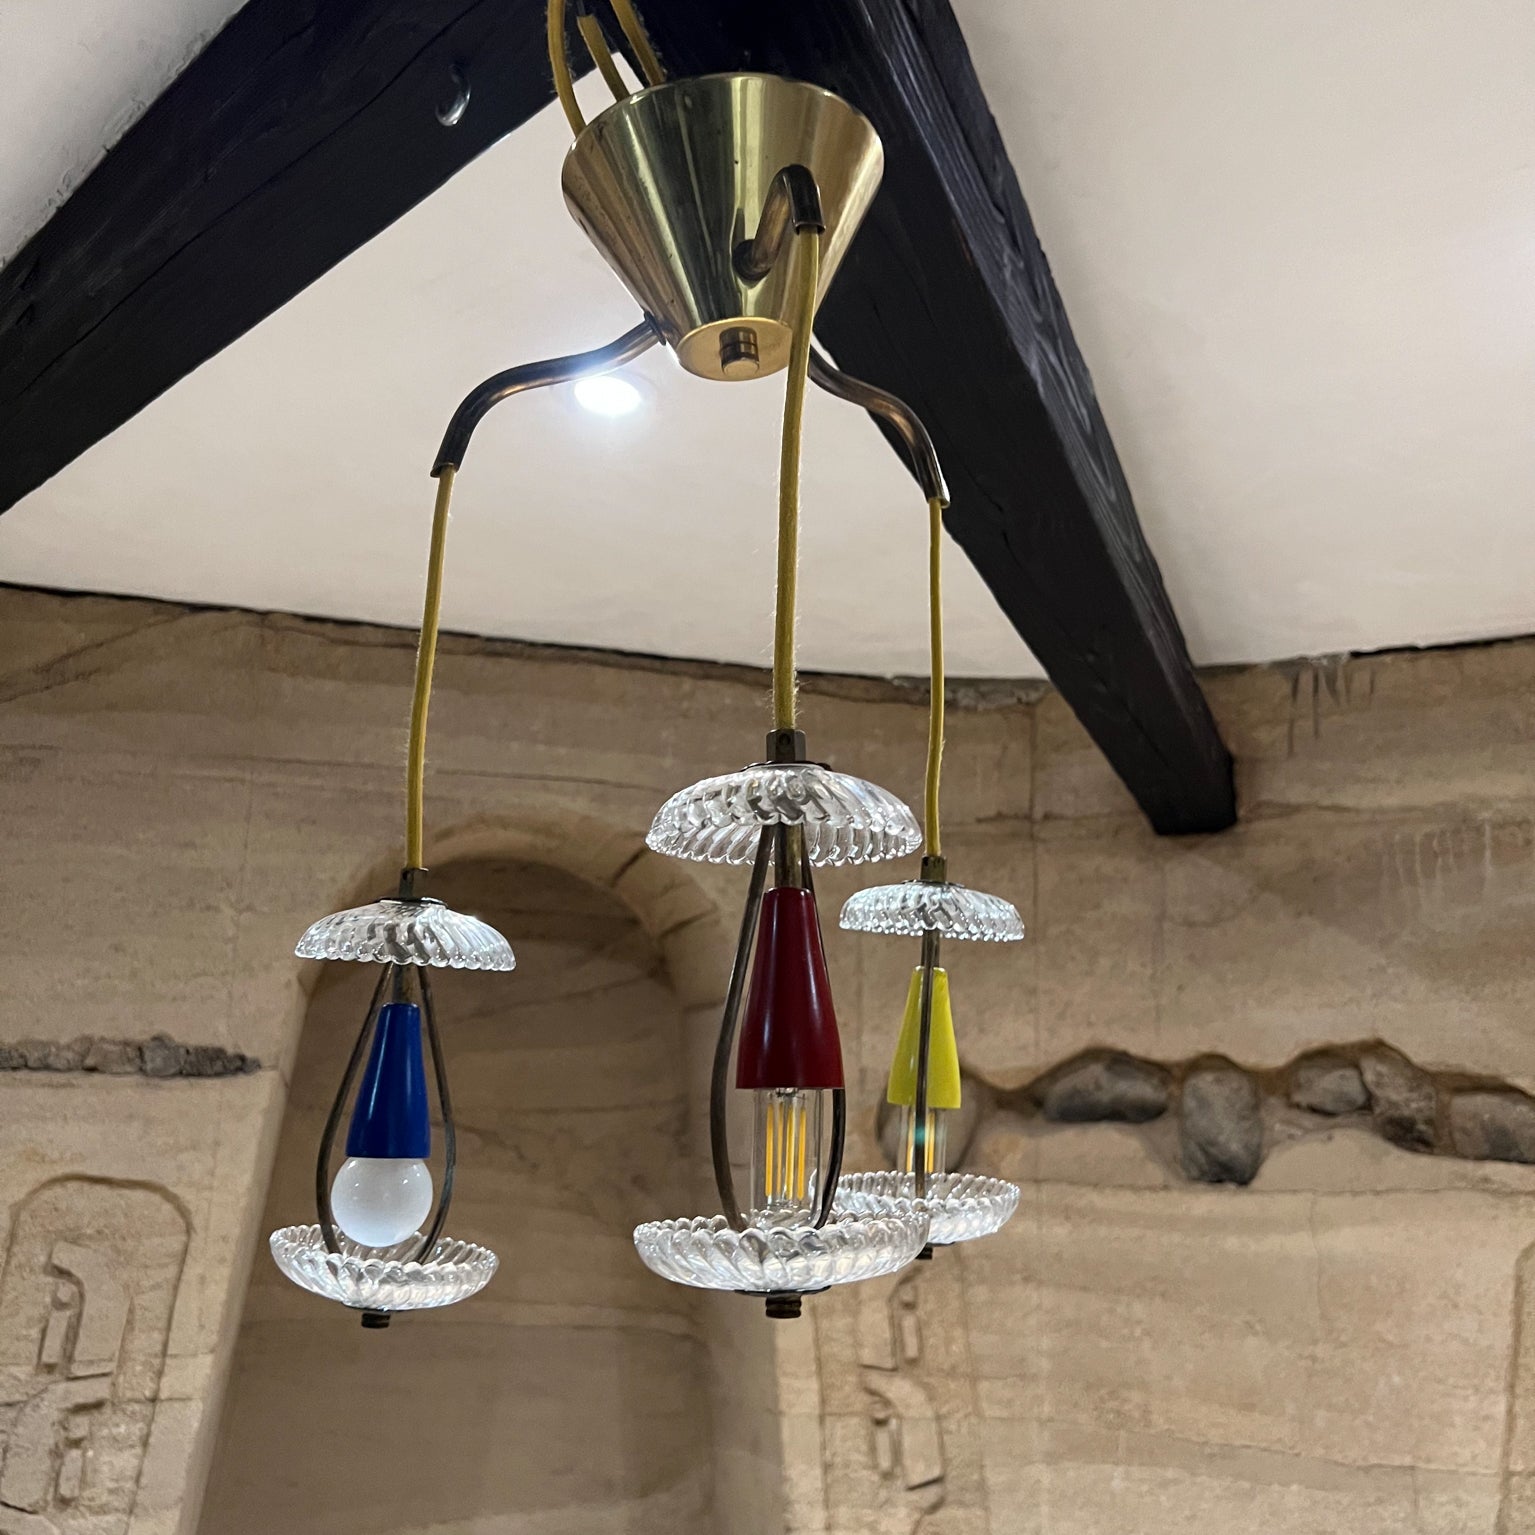 Vintage Modern 1950s Italian Trio pendant hanging chandelier lamp
Yellow, blue and red
Brass and art glass
Unmarked, attributed to style of Stilnovo.
Measures: 22 tall x 16 diameter
Preowned unrestored original condition.
See our images